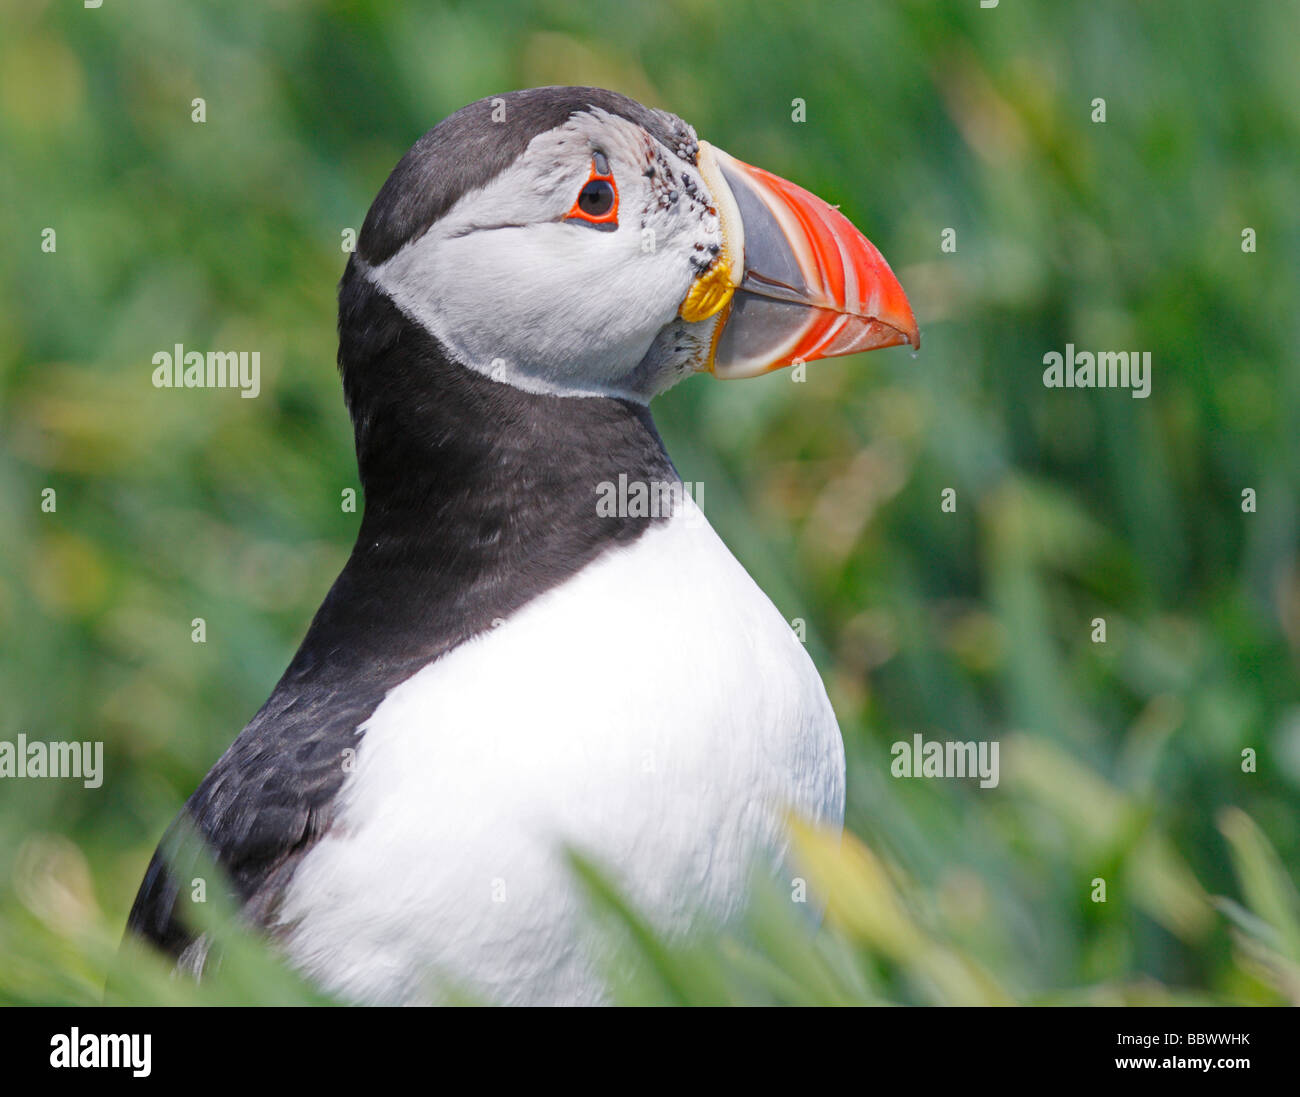 Atlantic Puffin infested with Ticks around its face. Stock Photo